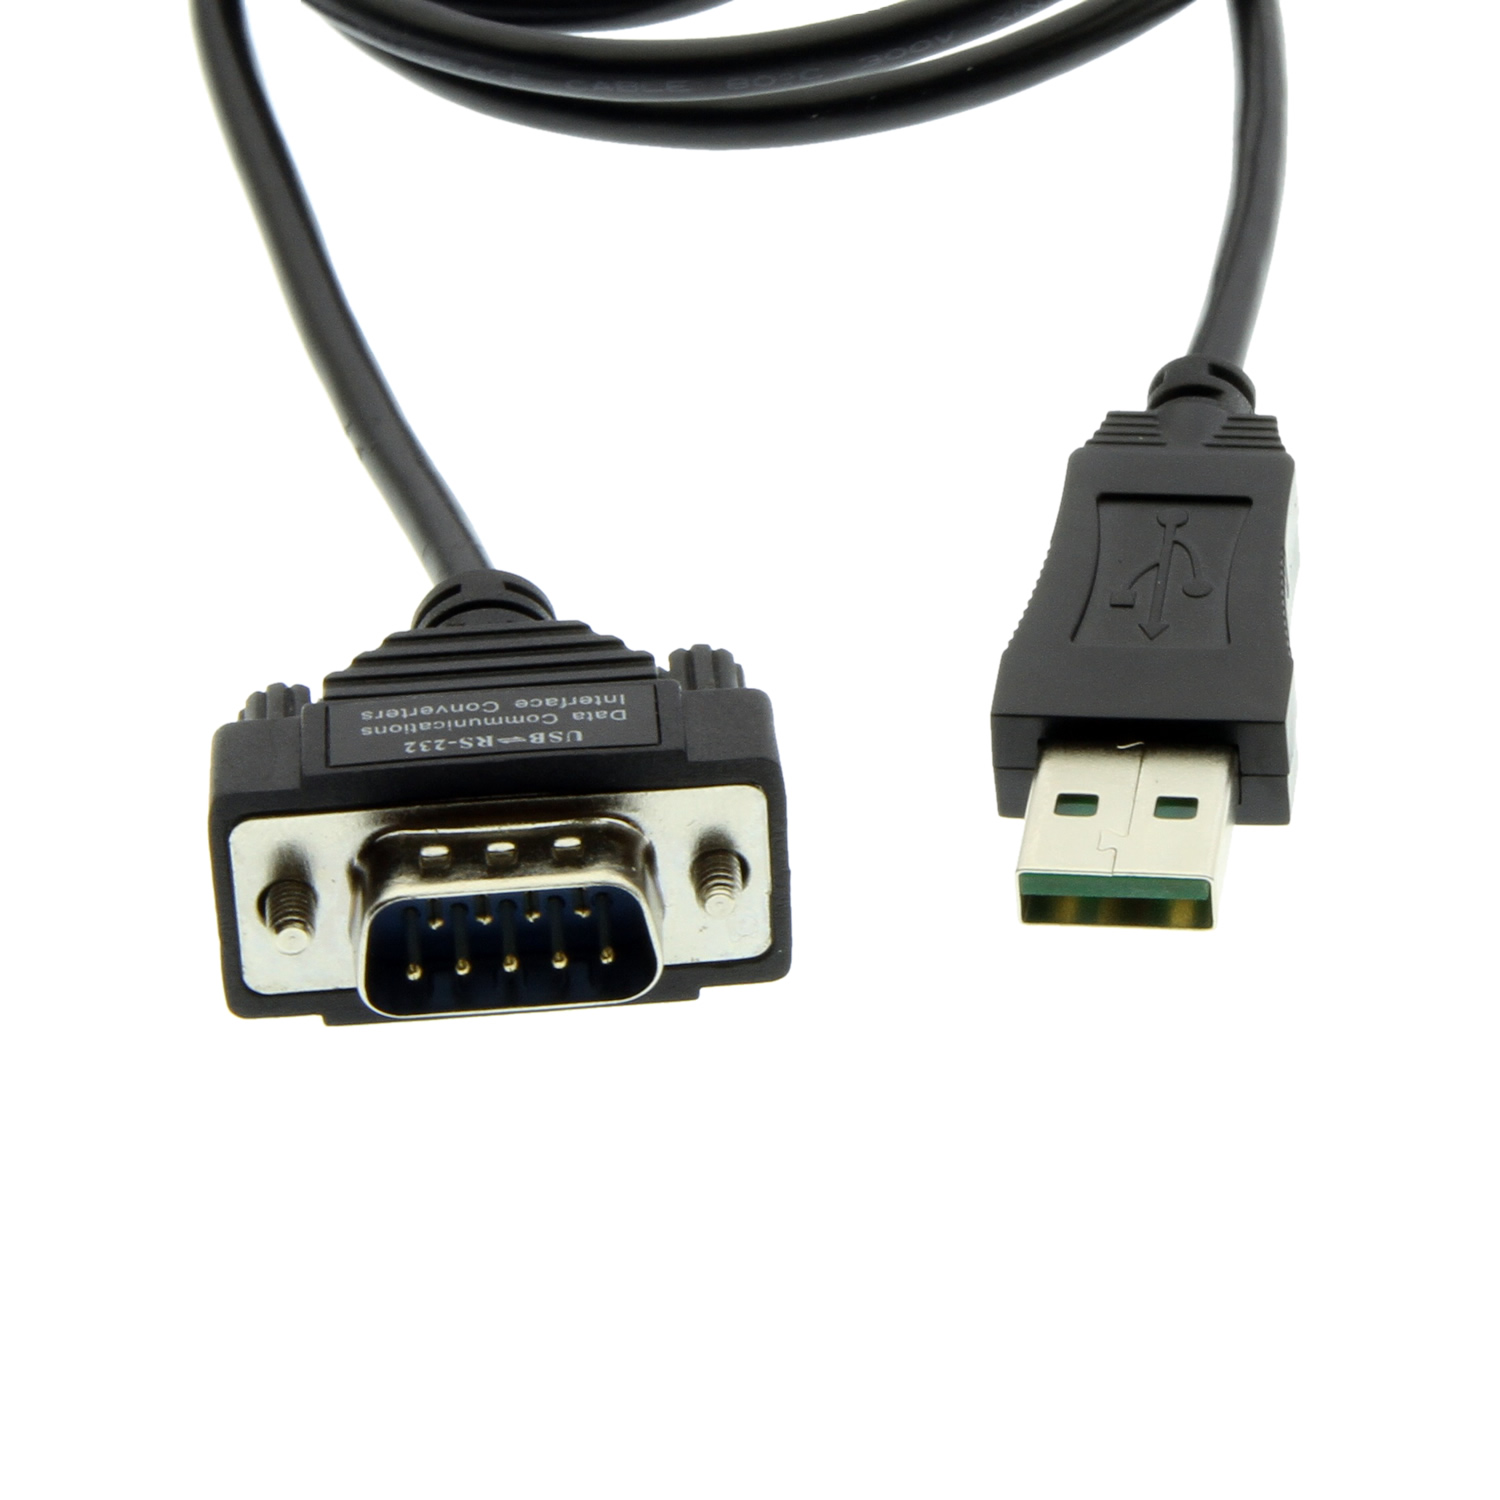 Gearmo 36inch FTDI USB to Serial Cable for MA PC Linux with Windows 10 Certified Drivers - image 1 of 3